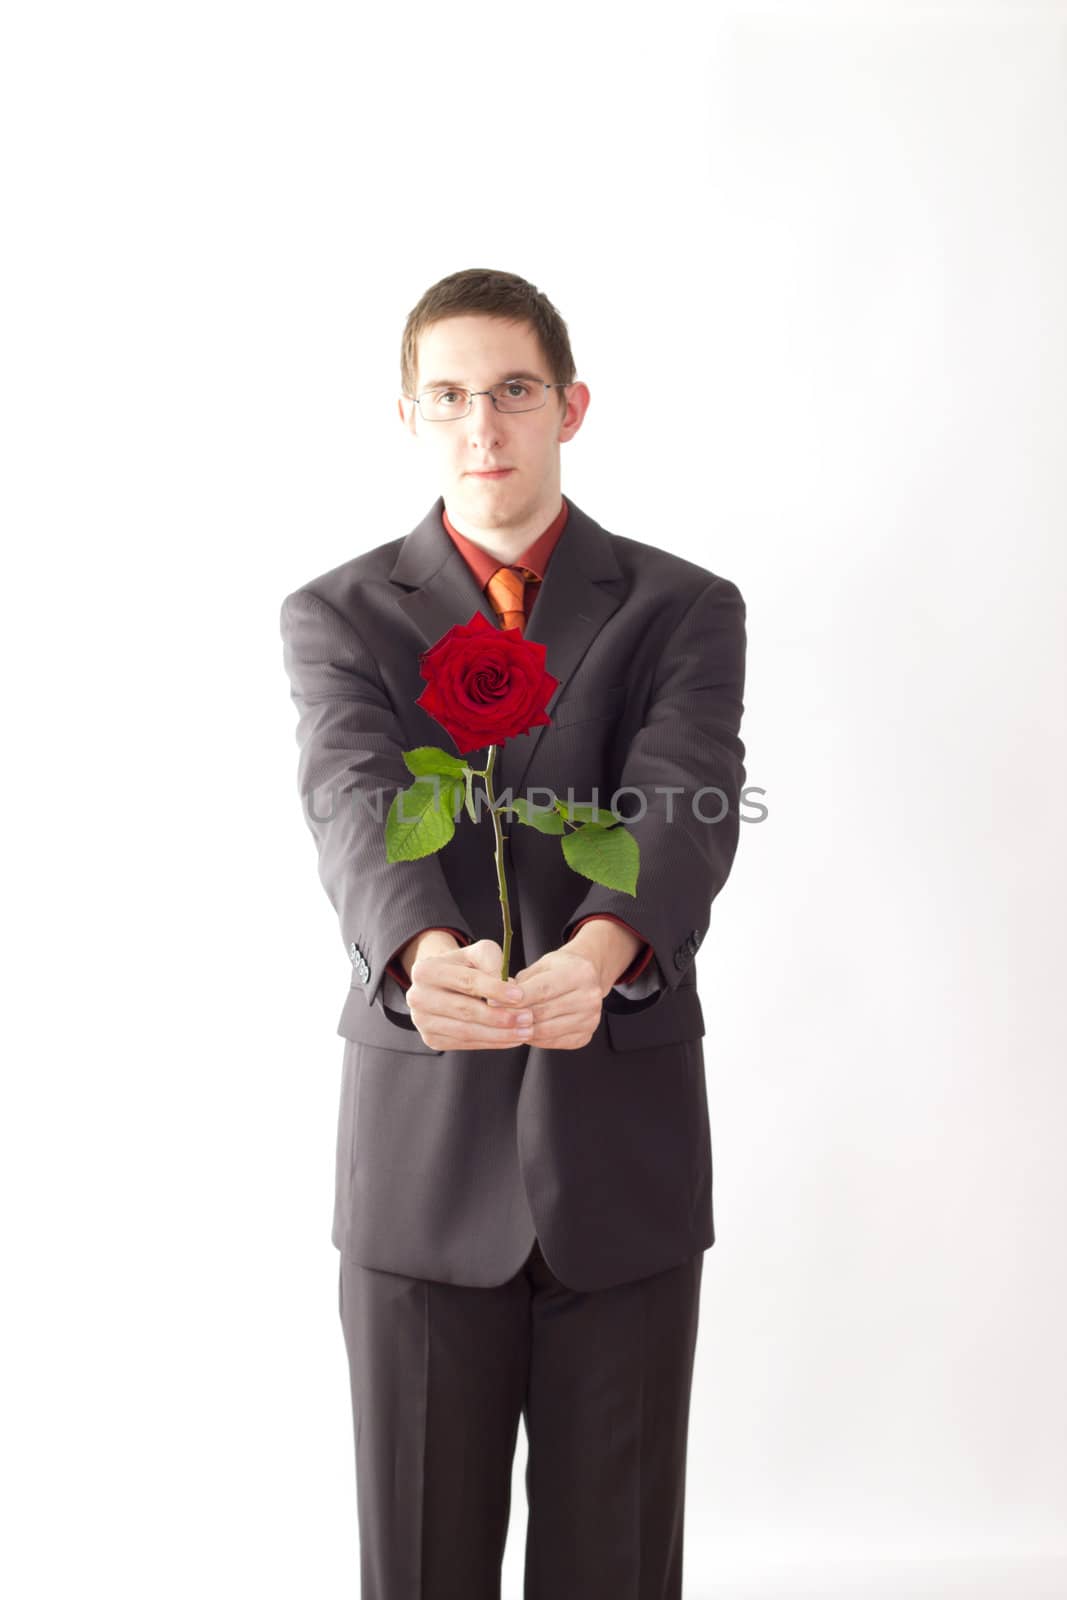 Young man with a rose by gwolters